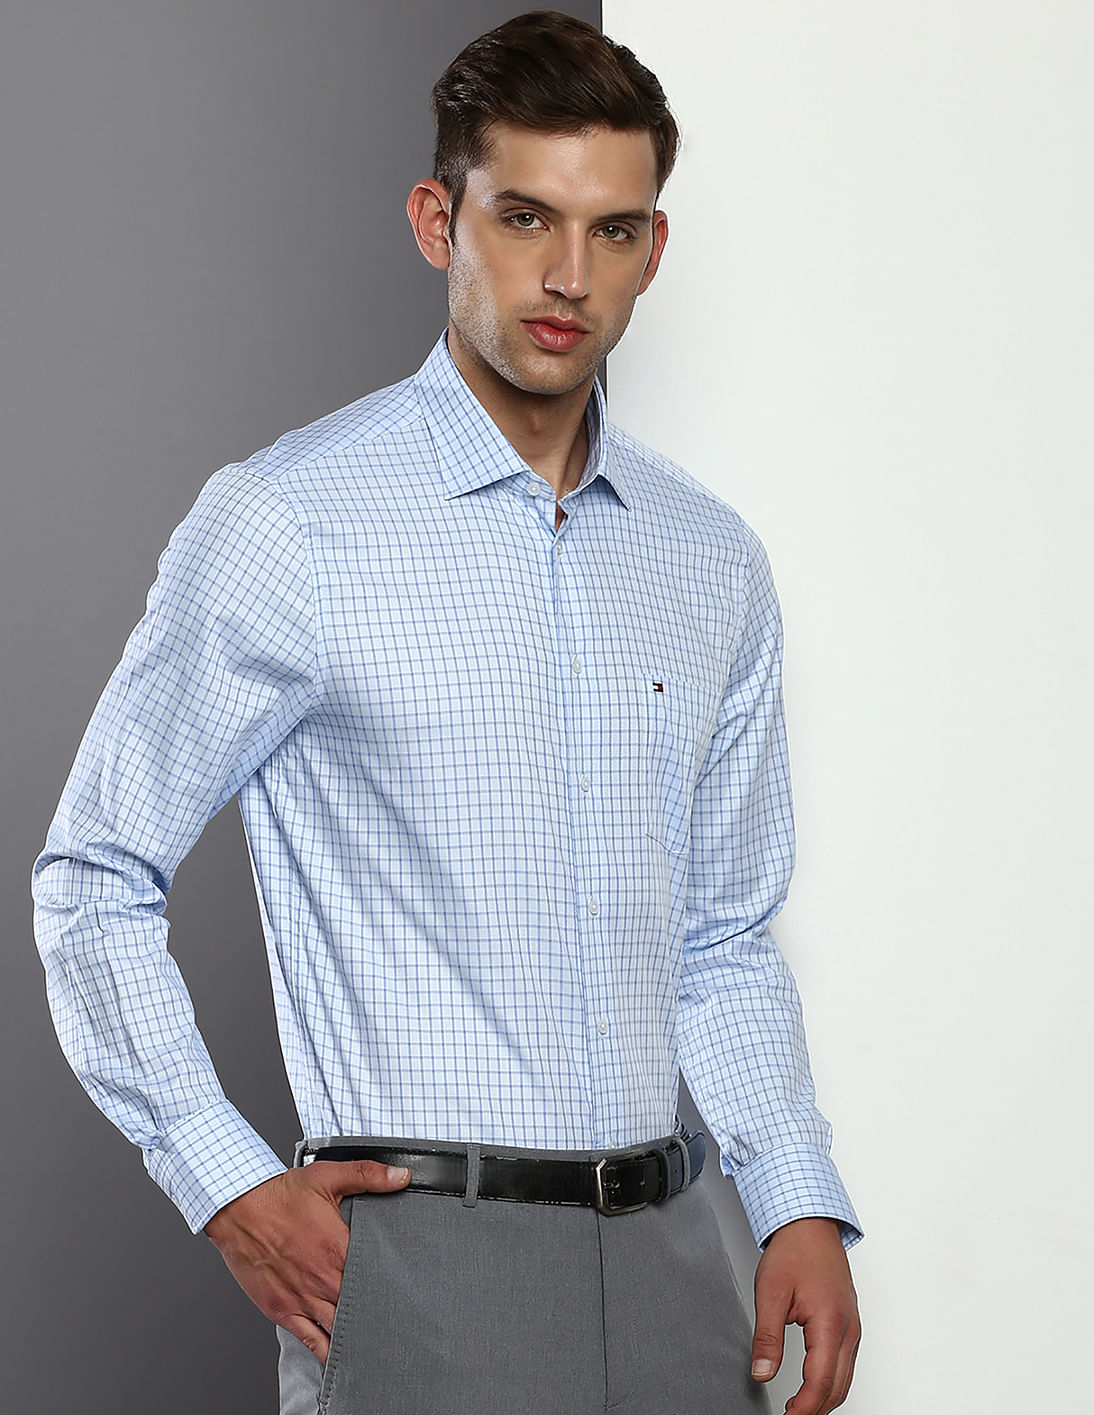 Buy Tommy Hilfiger Outline Check Cotton Shirt - NNNOW.com